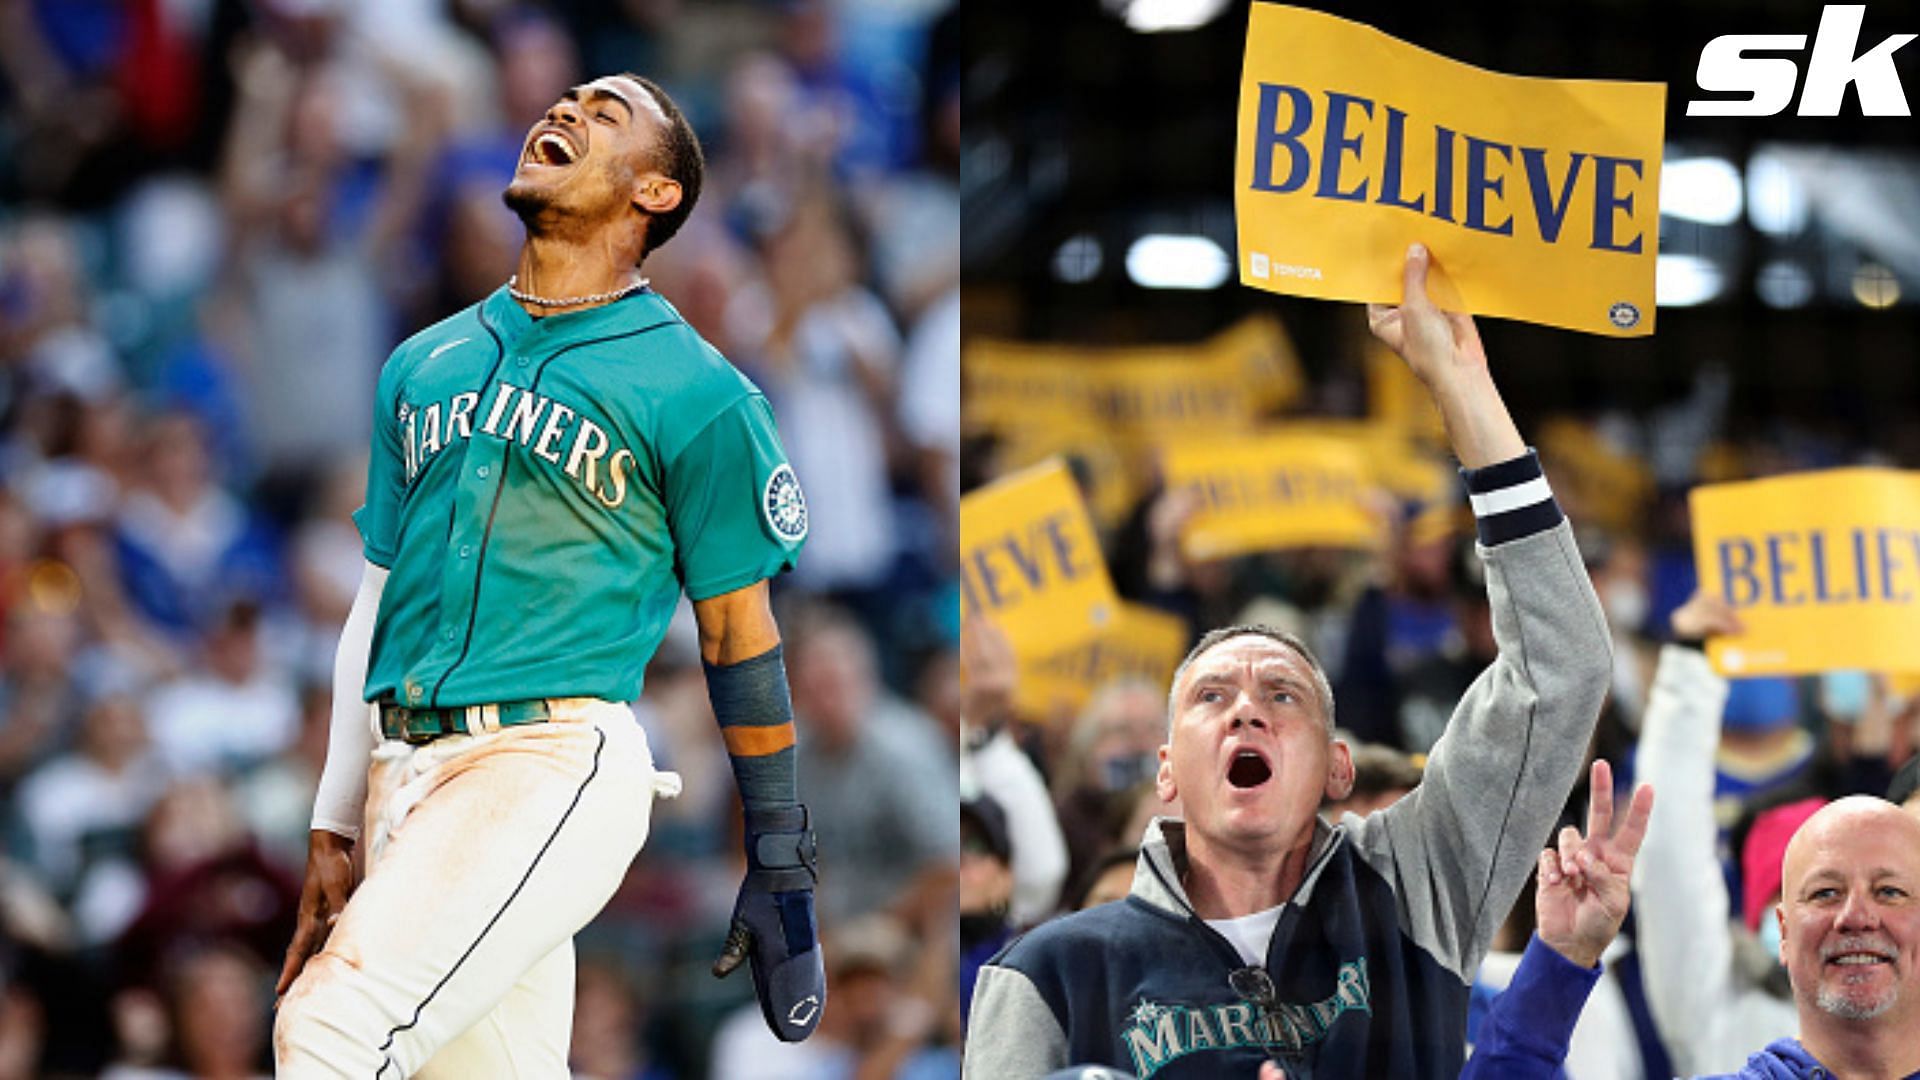 Seattle Mariners fans delighted as Julio Rodriguez leads team to the top of AL West.